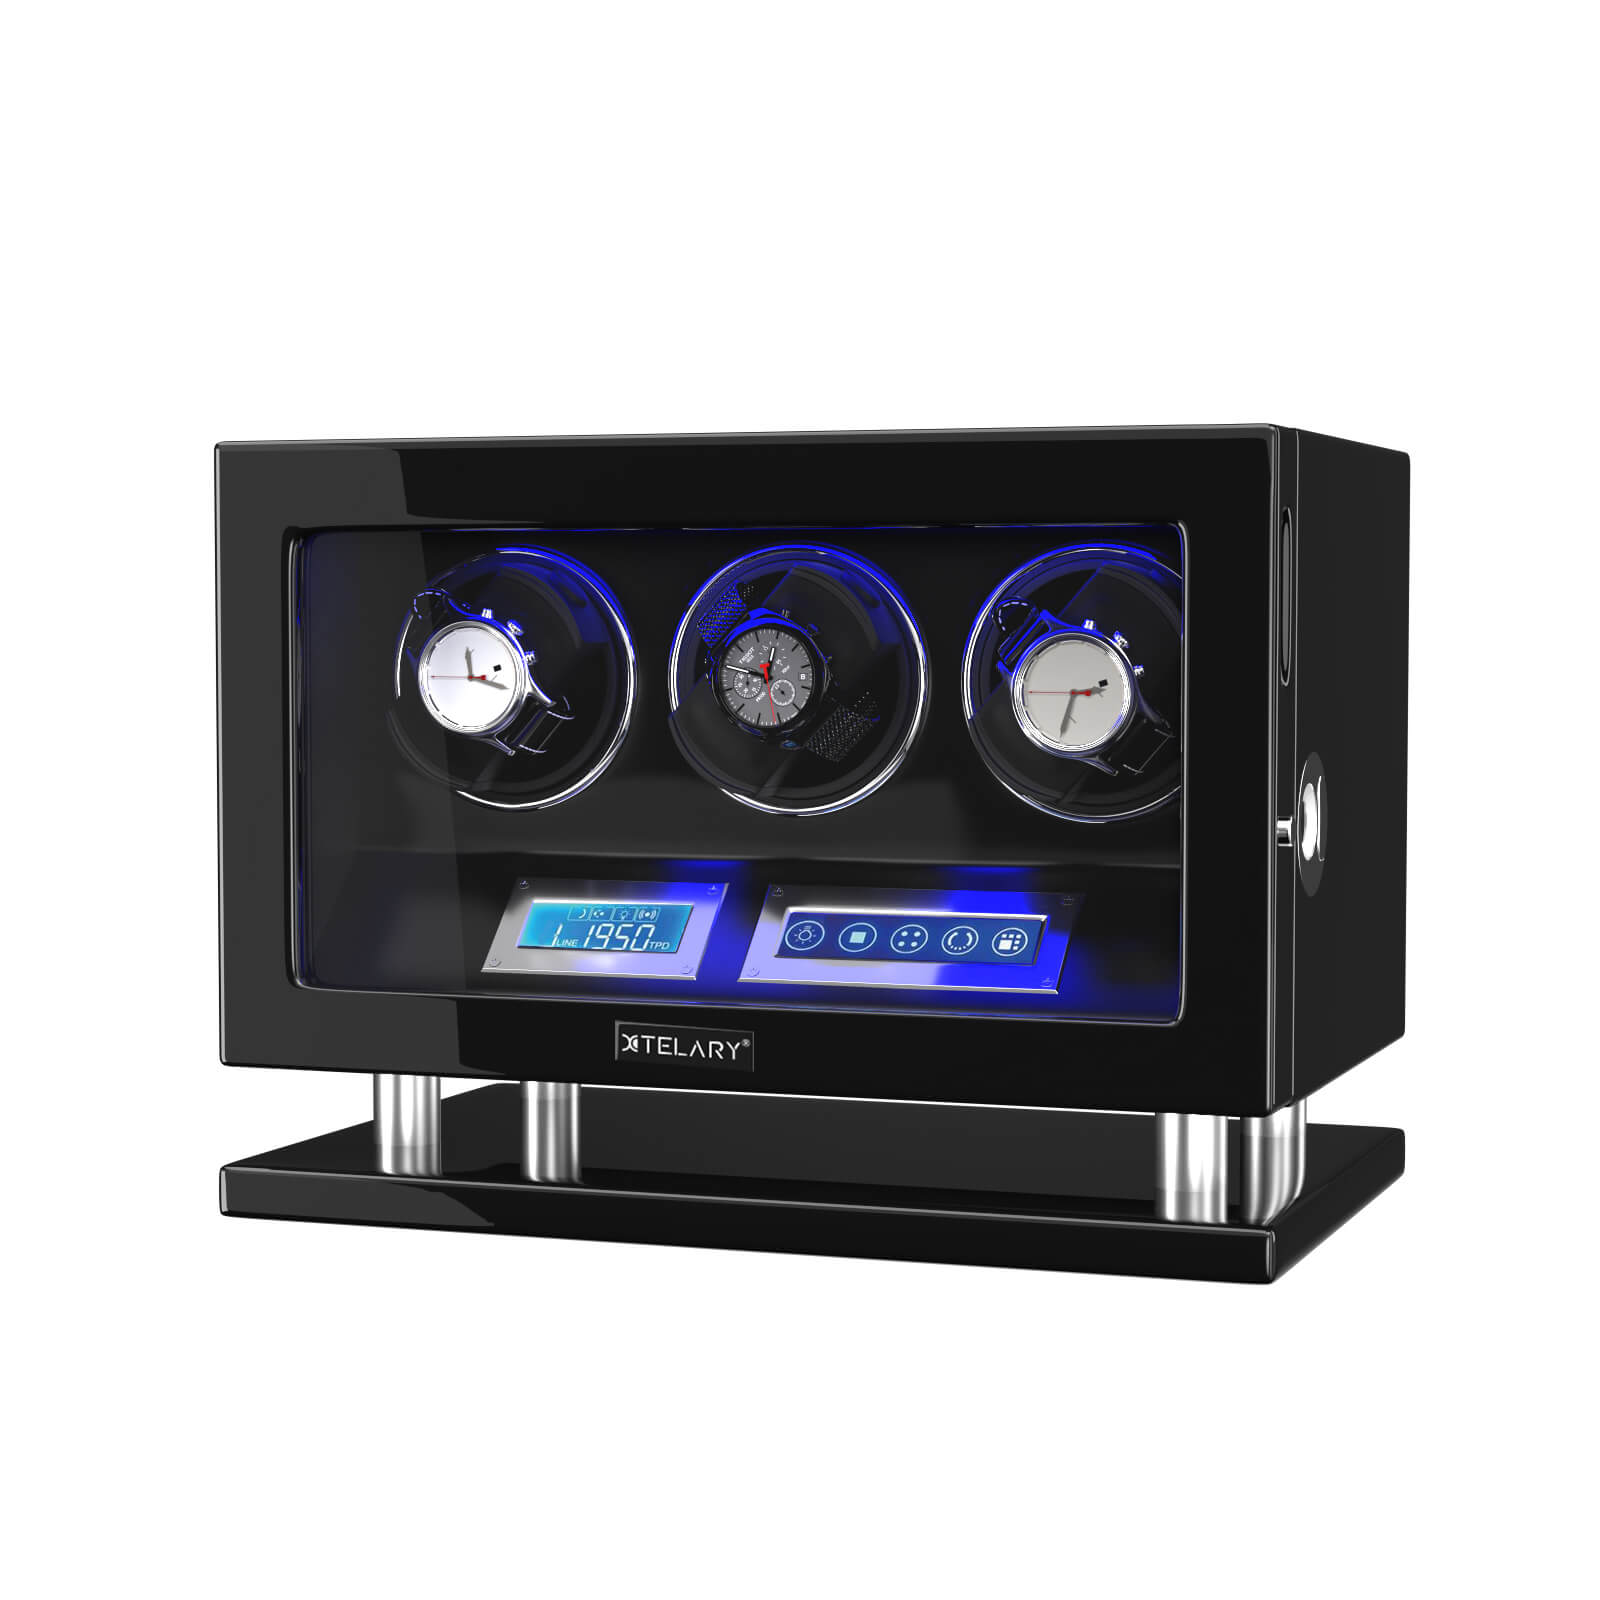 Fingerprint Unlock Watch Winder for 3 Slot Winding Spaces Automatic Watches with LCD Touchscreen Control